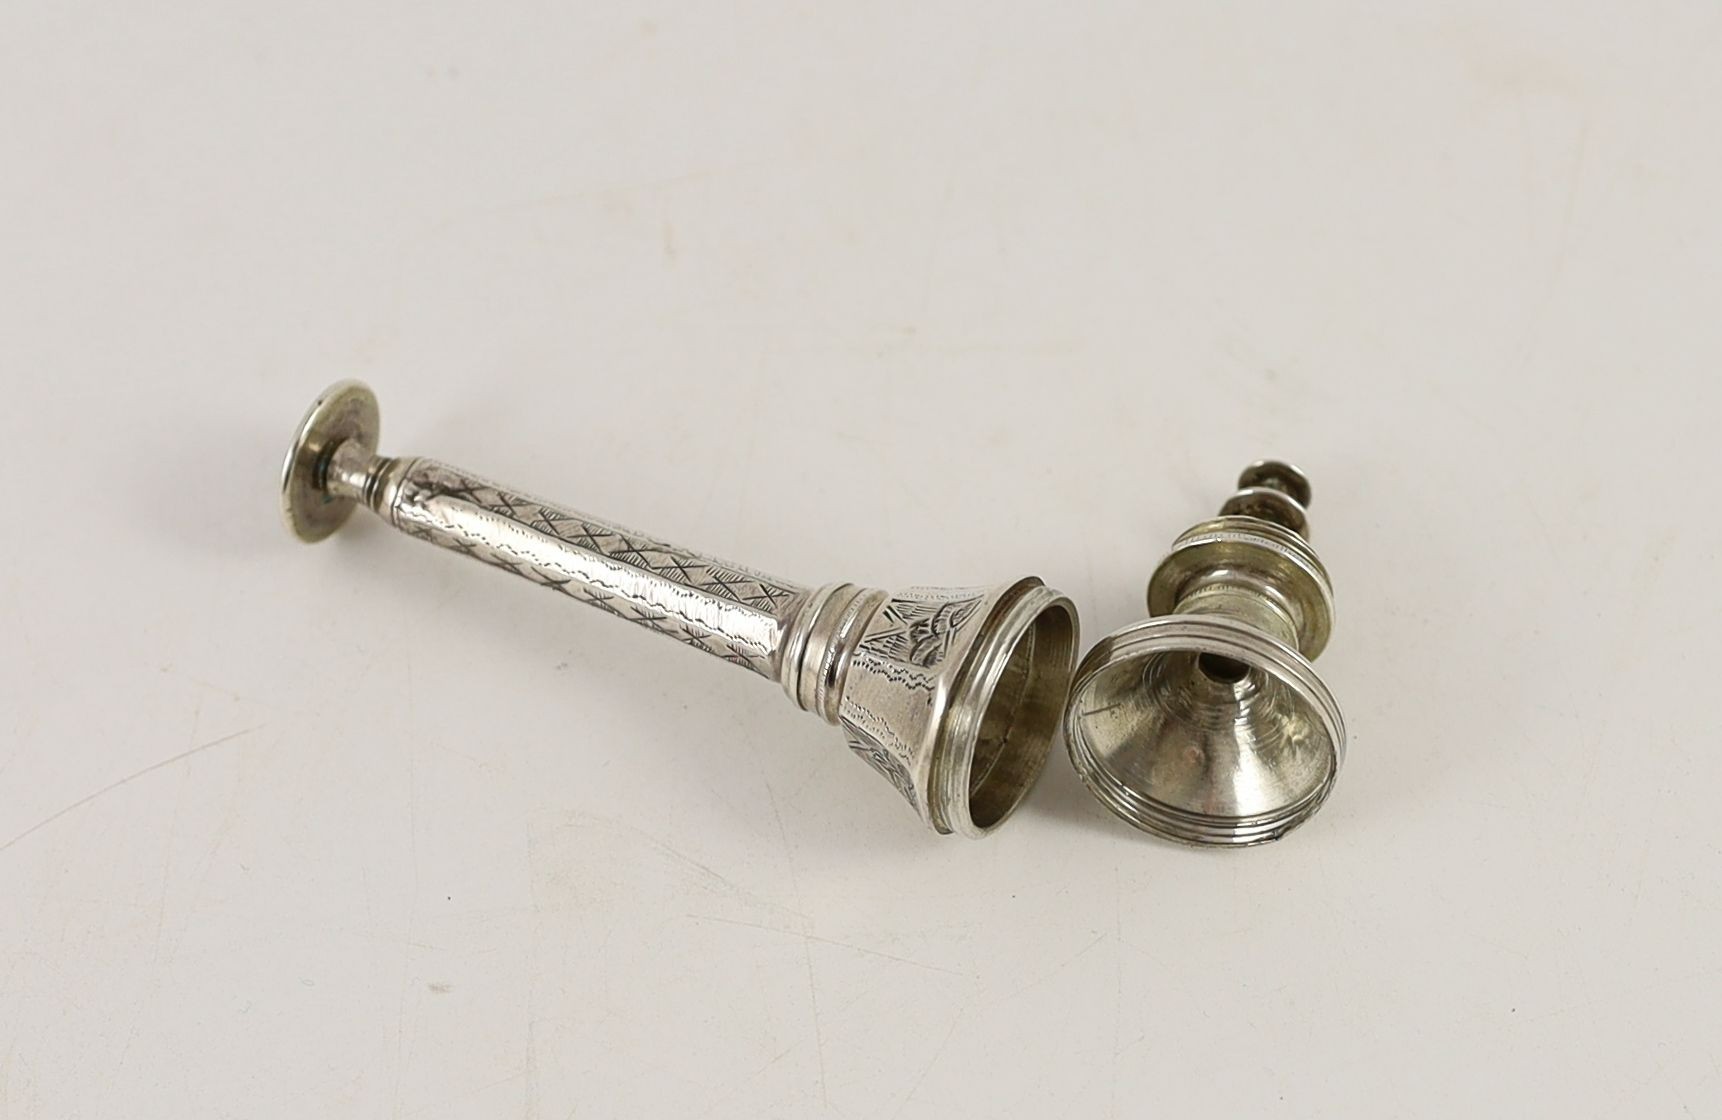 An unusual 19th century silver seal?, of mace form, in three sections, with engraved decoration